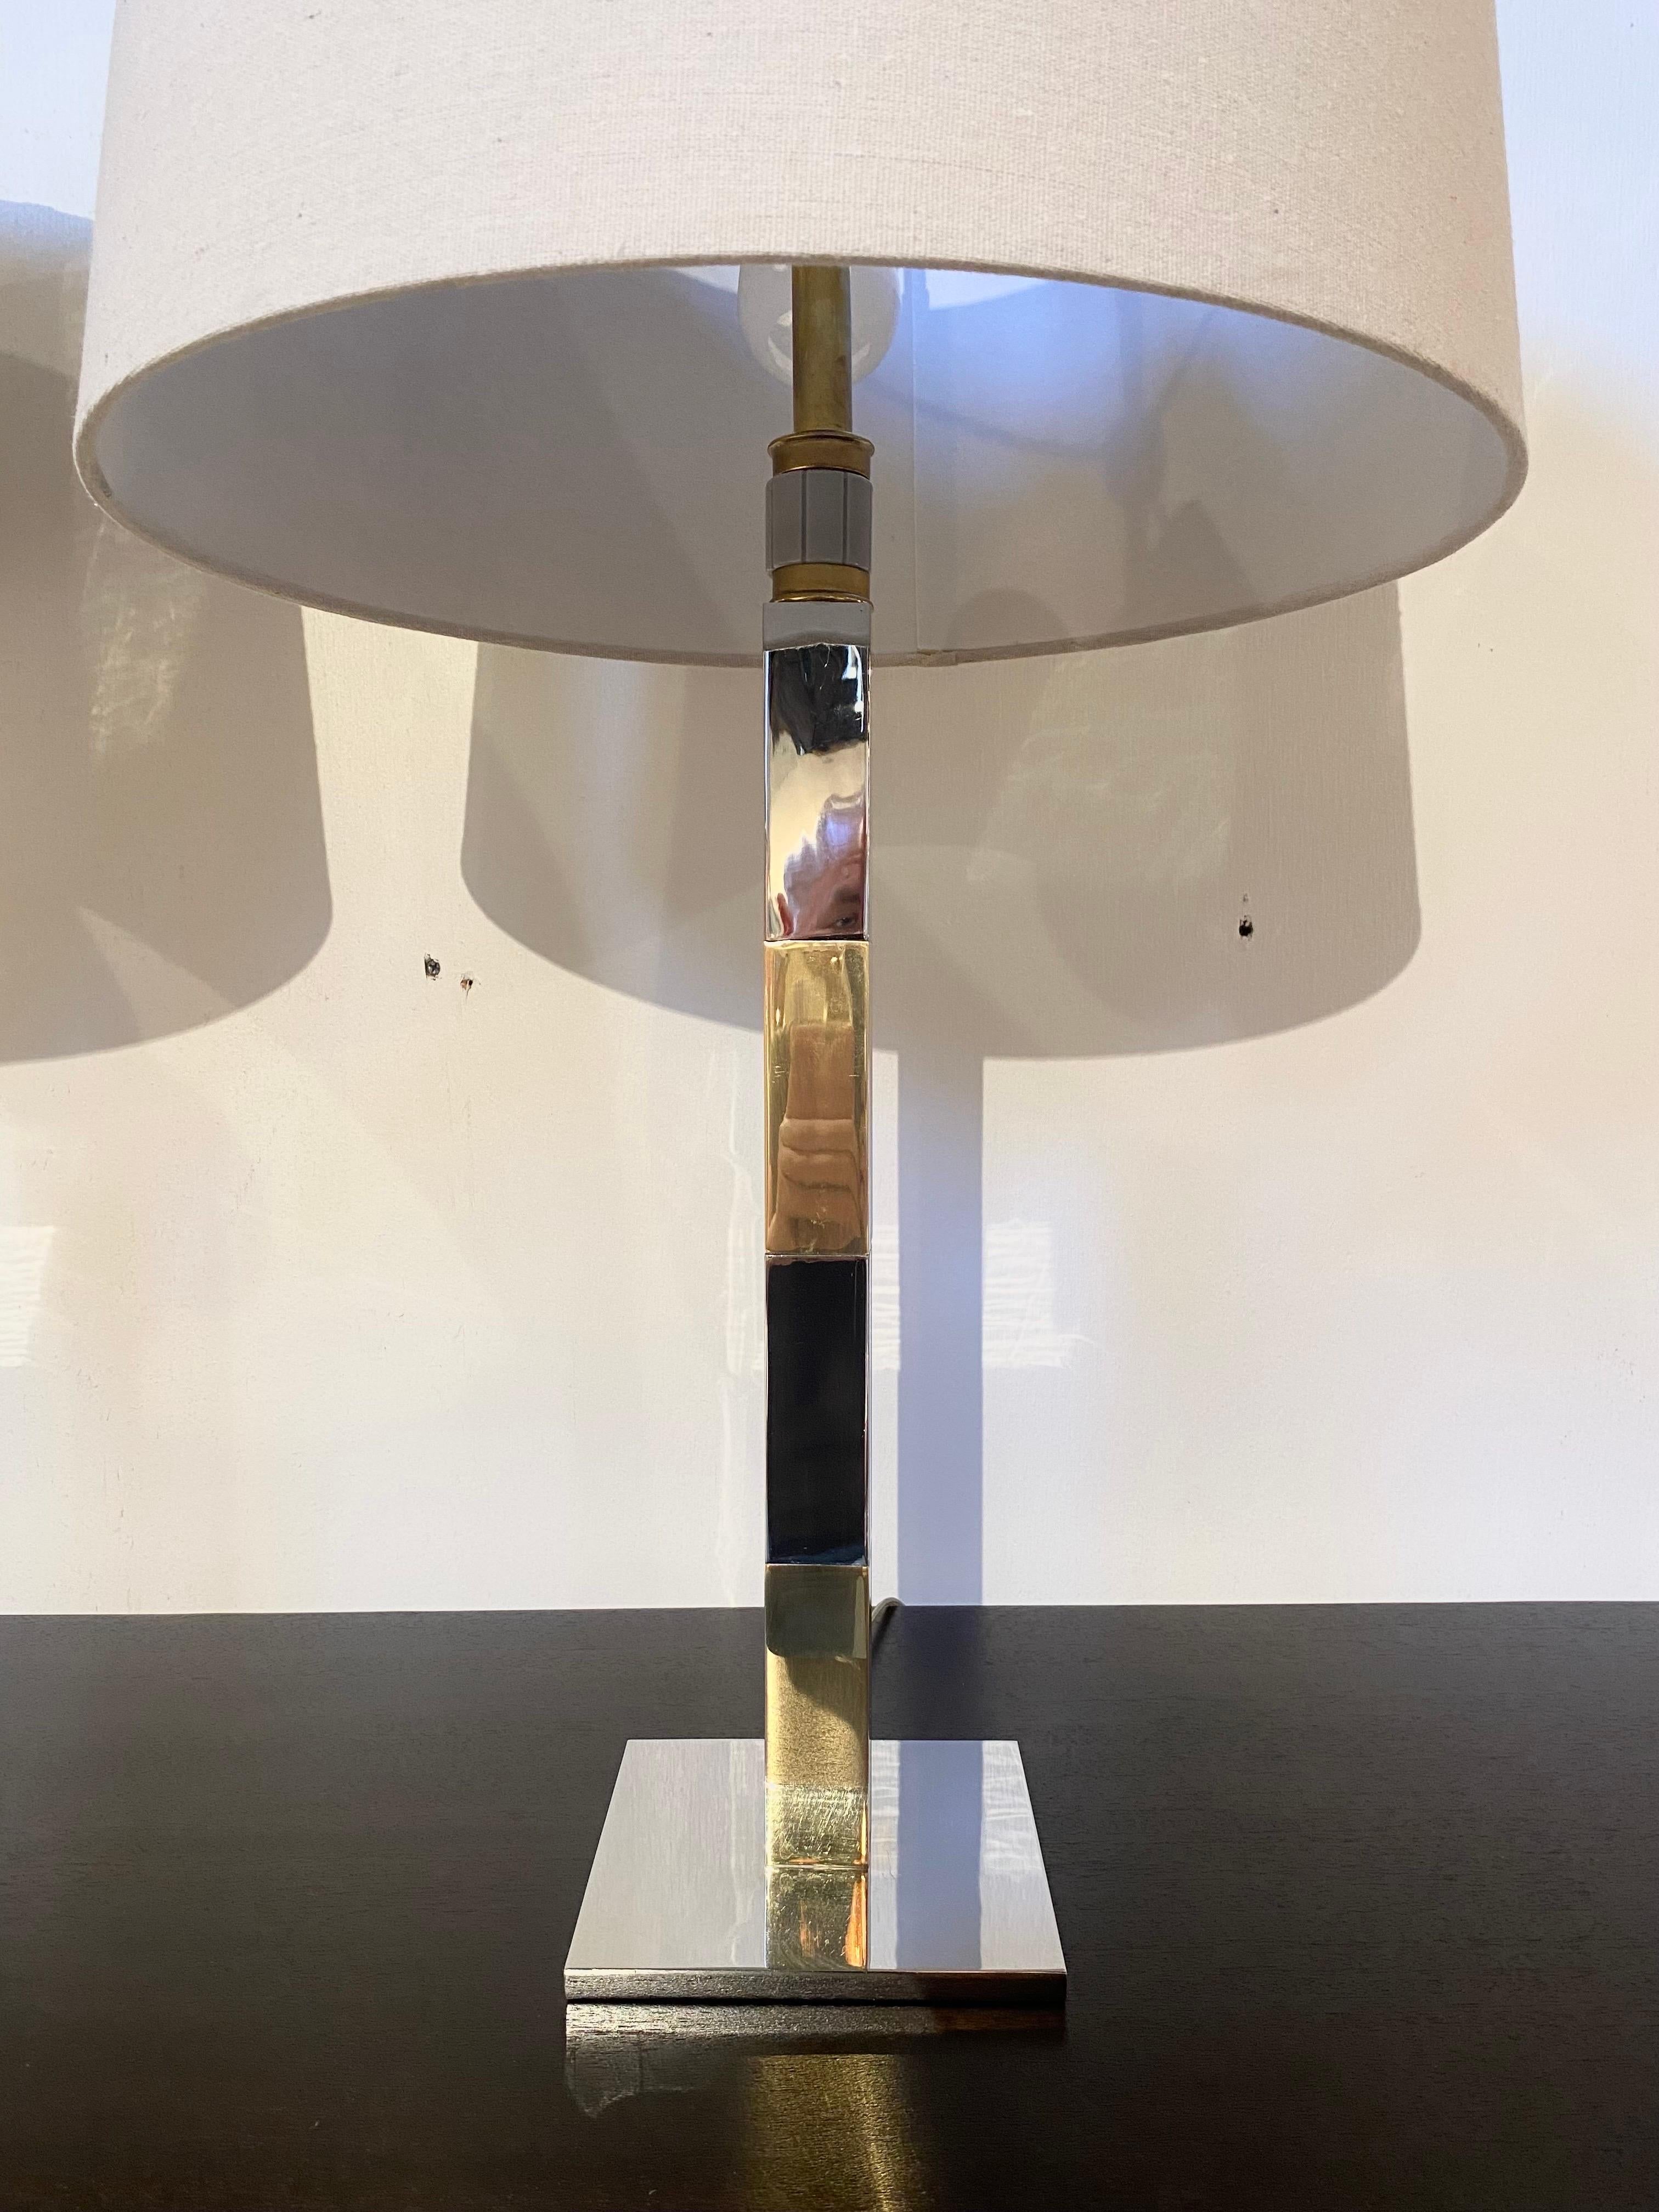 A stunning pair of lamps by Stewart Ross James for Hansen Lighting. These are stacked chrome and brass with the signature Hansen three cluster fixture and rotating three-way switch. Each is in very good condition with minor imperfections as shown.